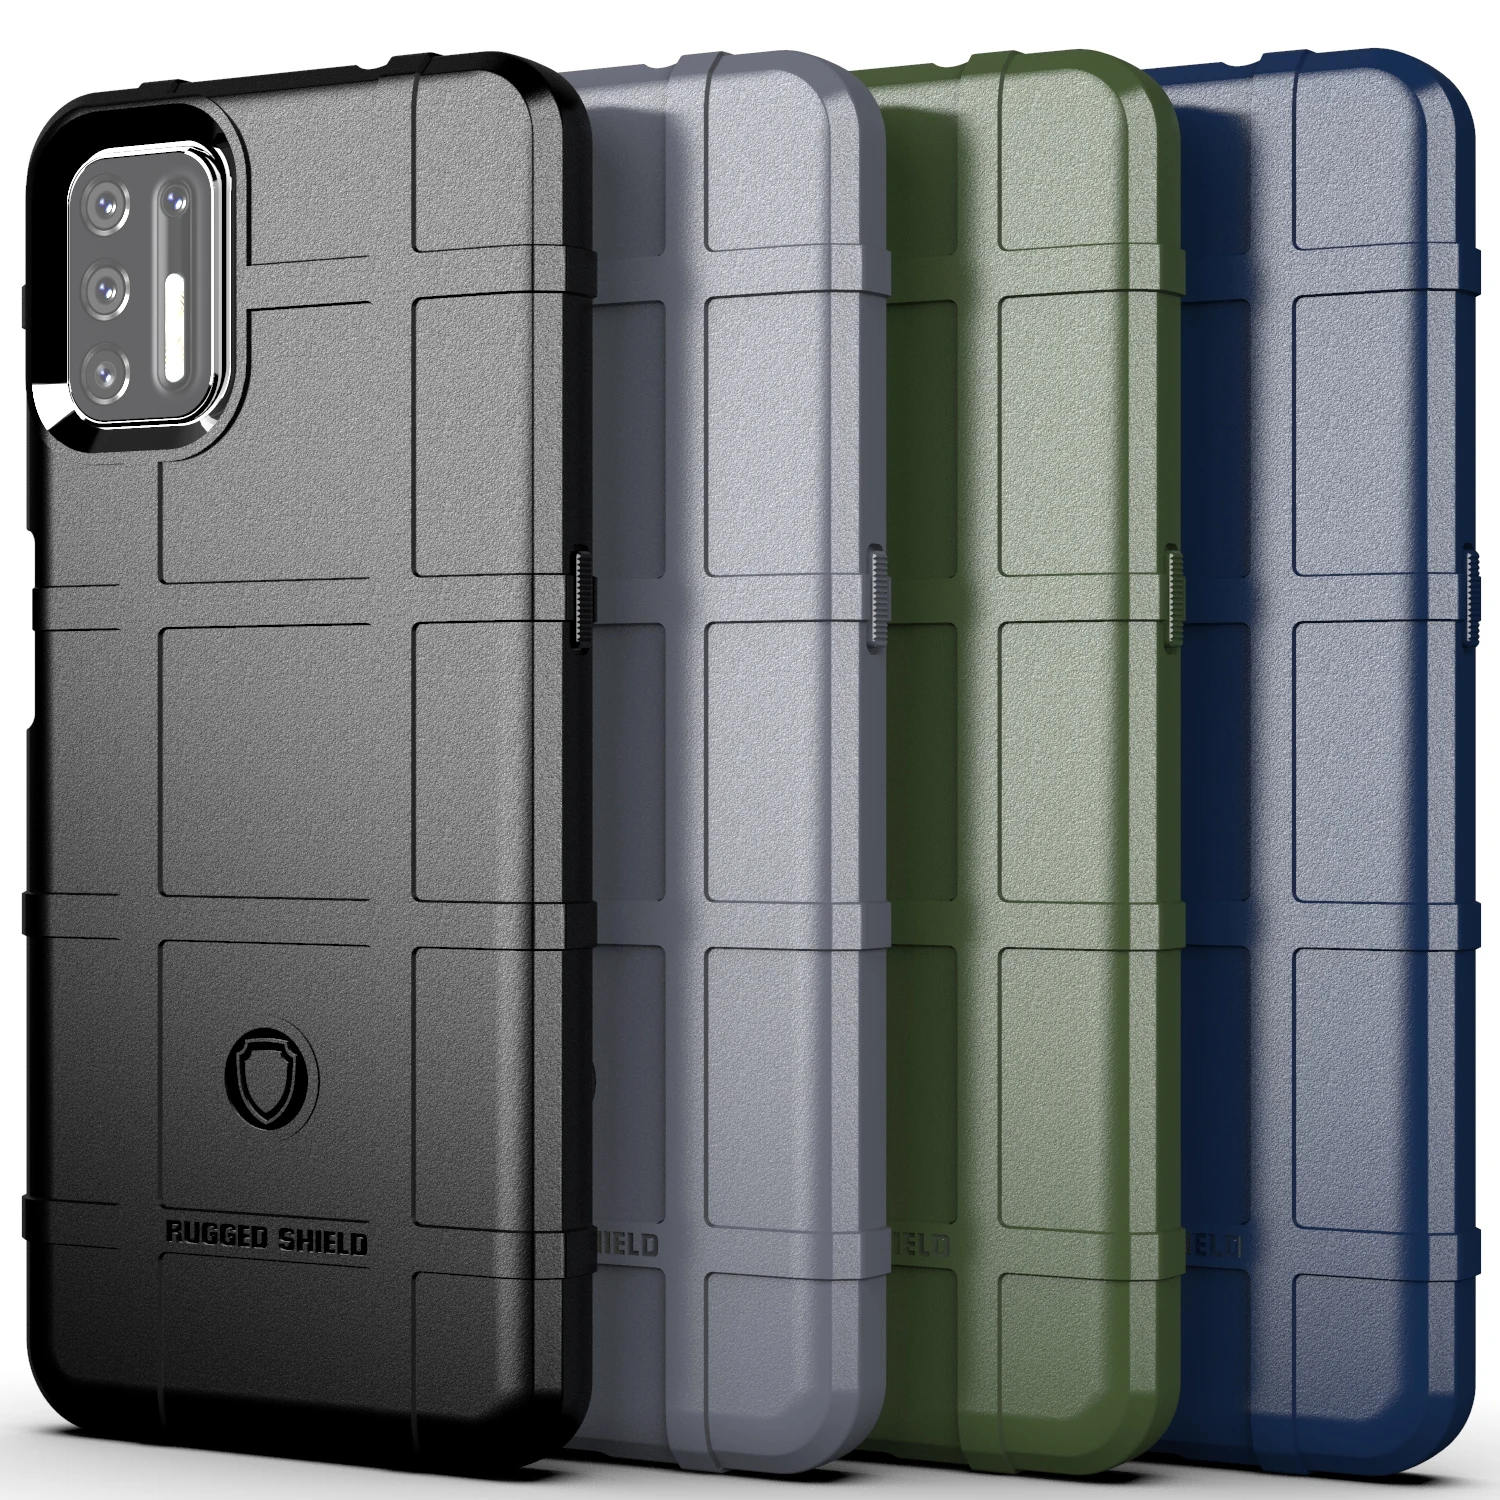 

Rugged Shield Shockproof Armor Case For Motorola G6 G6plus G7 G7plus G8 G8plus G8power lite moto G9 G9play G9plus G9power Coque